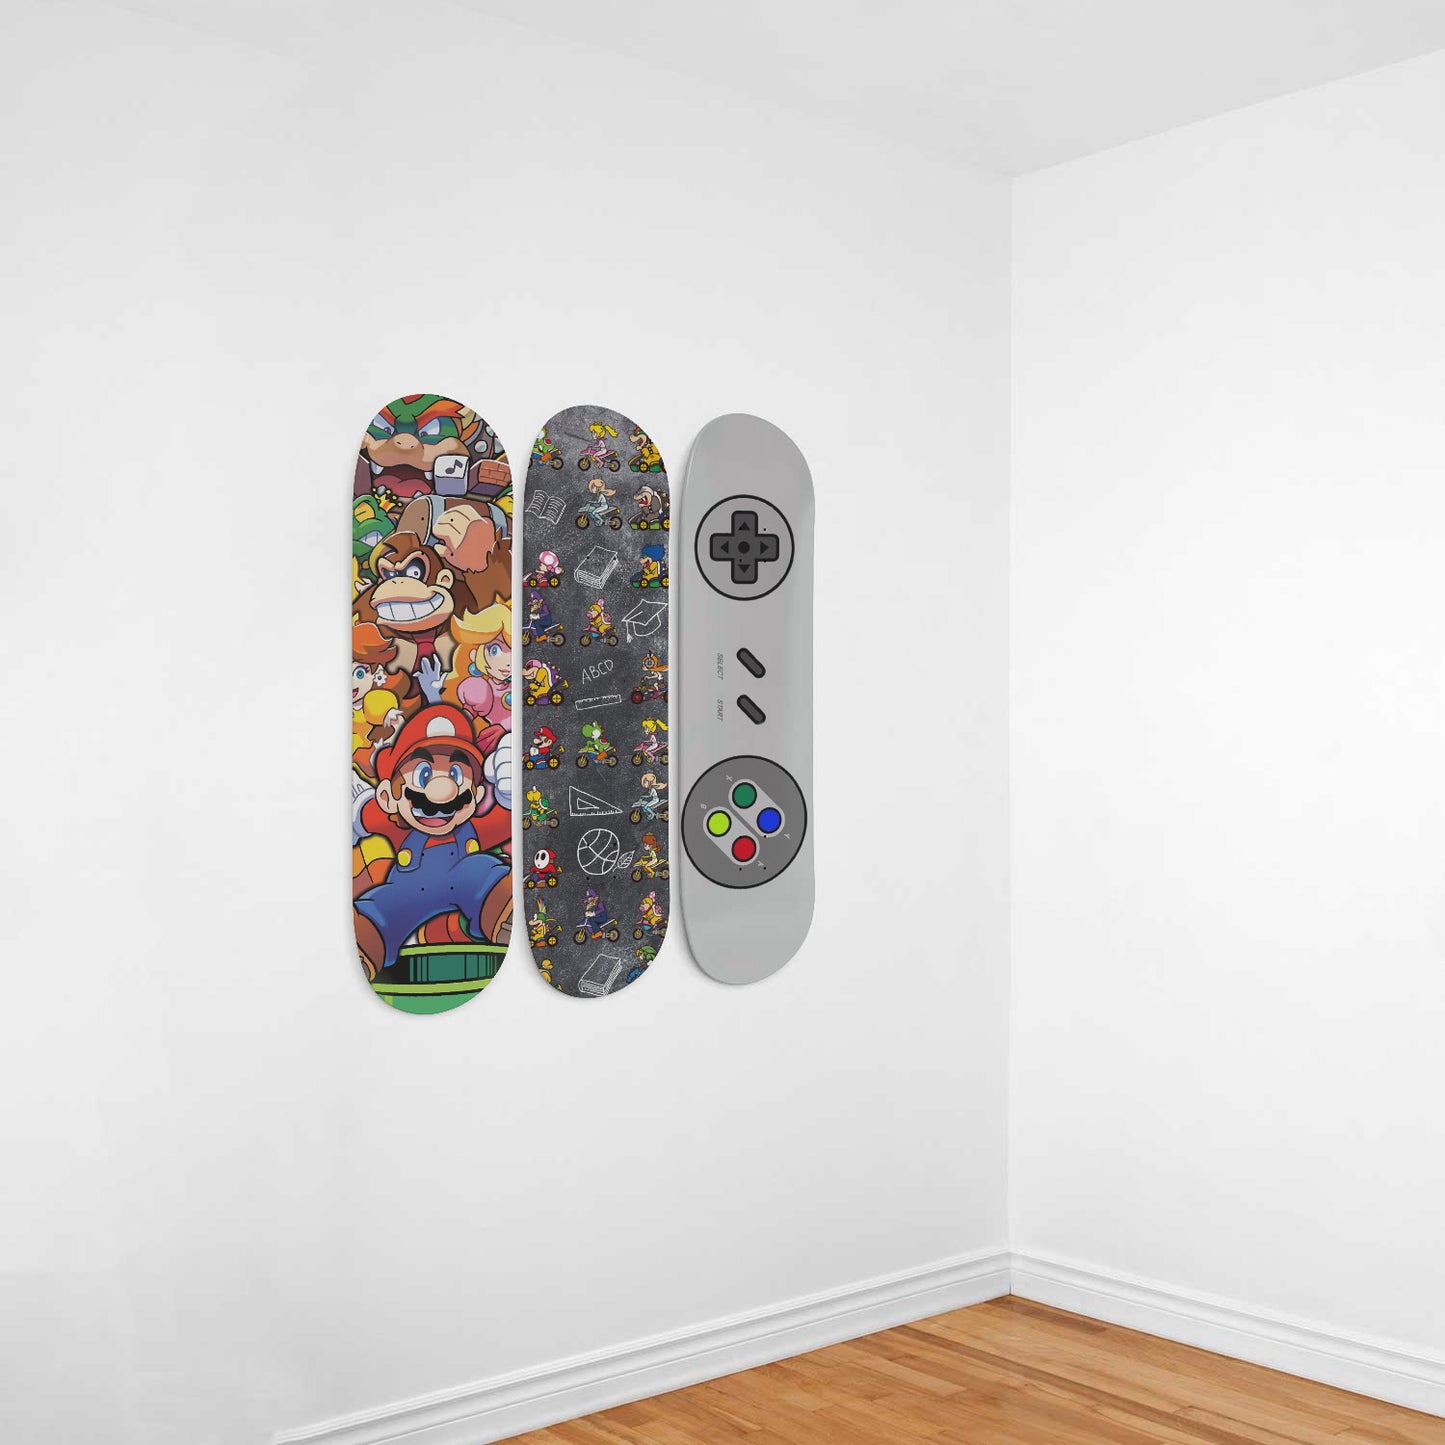 Cute Game characters and controller - 3 piece Skateboard Wall Art